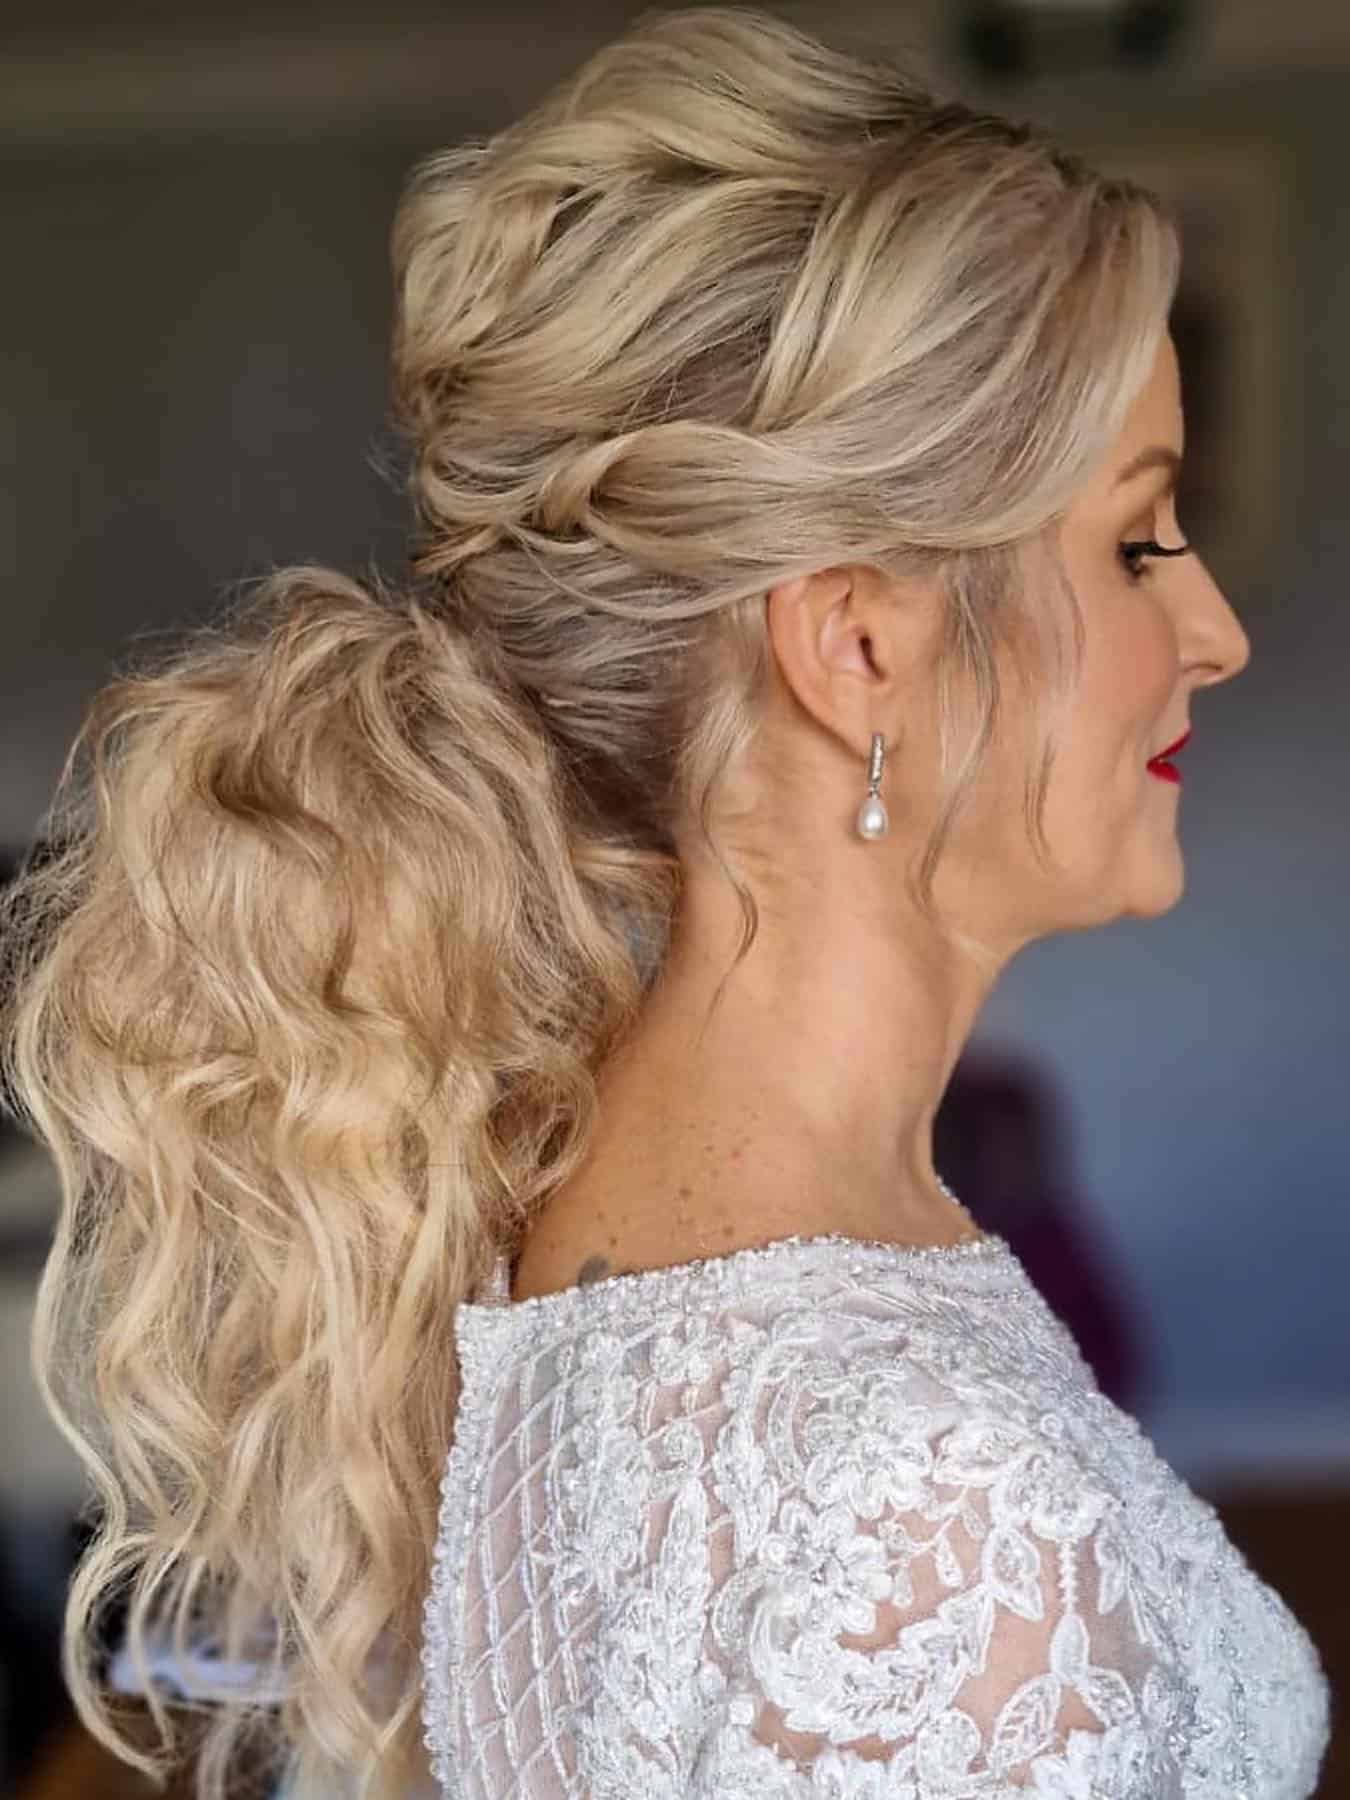 Meet the Exhibitor - WIN Luxurious Side Filler Extensions from Cascata Hair  Extensions! - Wedding Journal